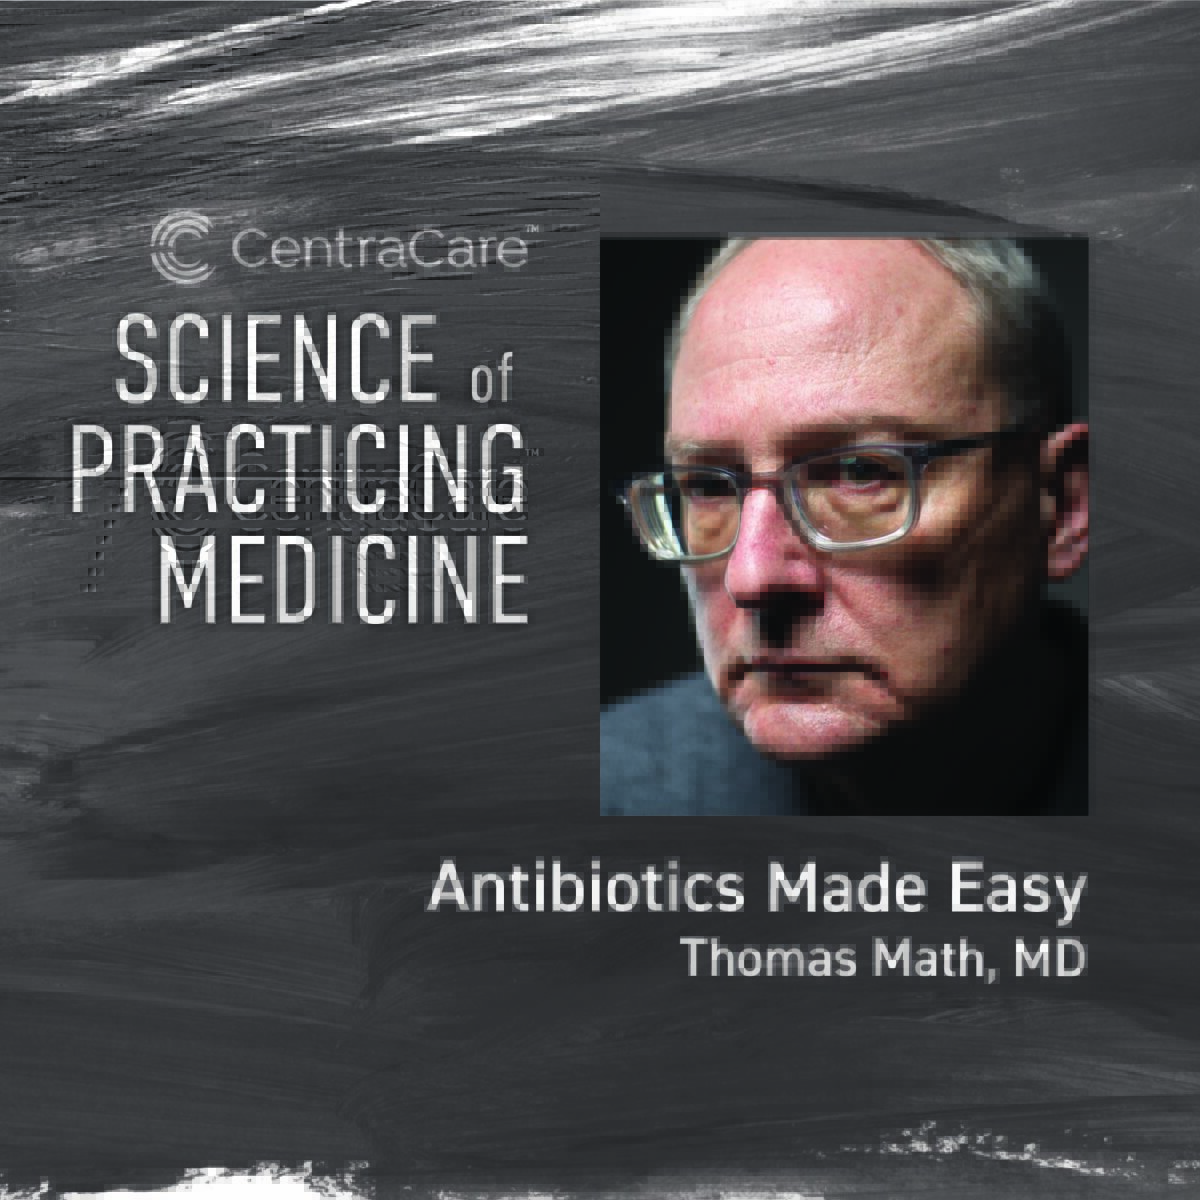 Cover art for the Science of Practicing Medicine recorded CME podcast on Antibiotics Made Easy with Dr. Thomas Math